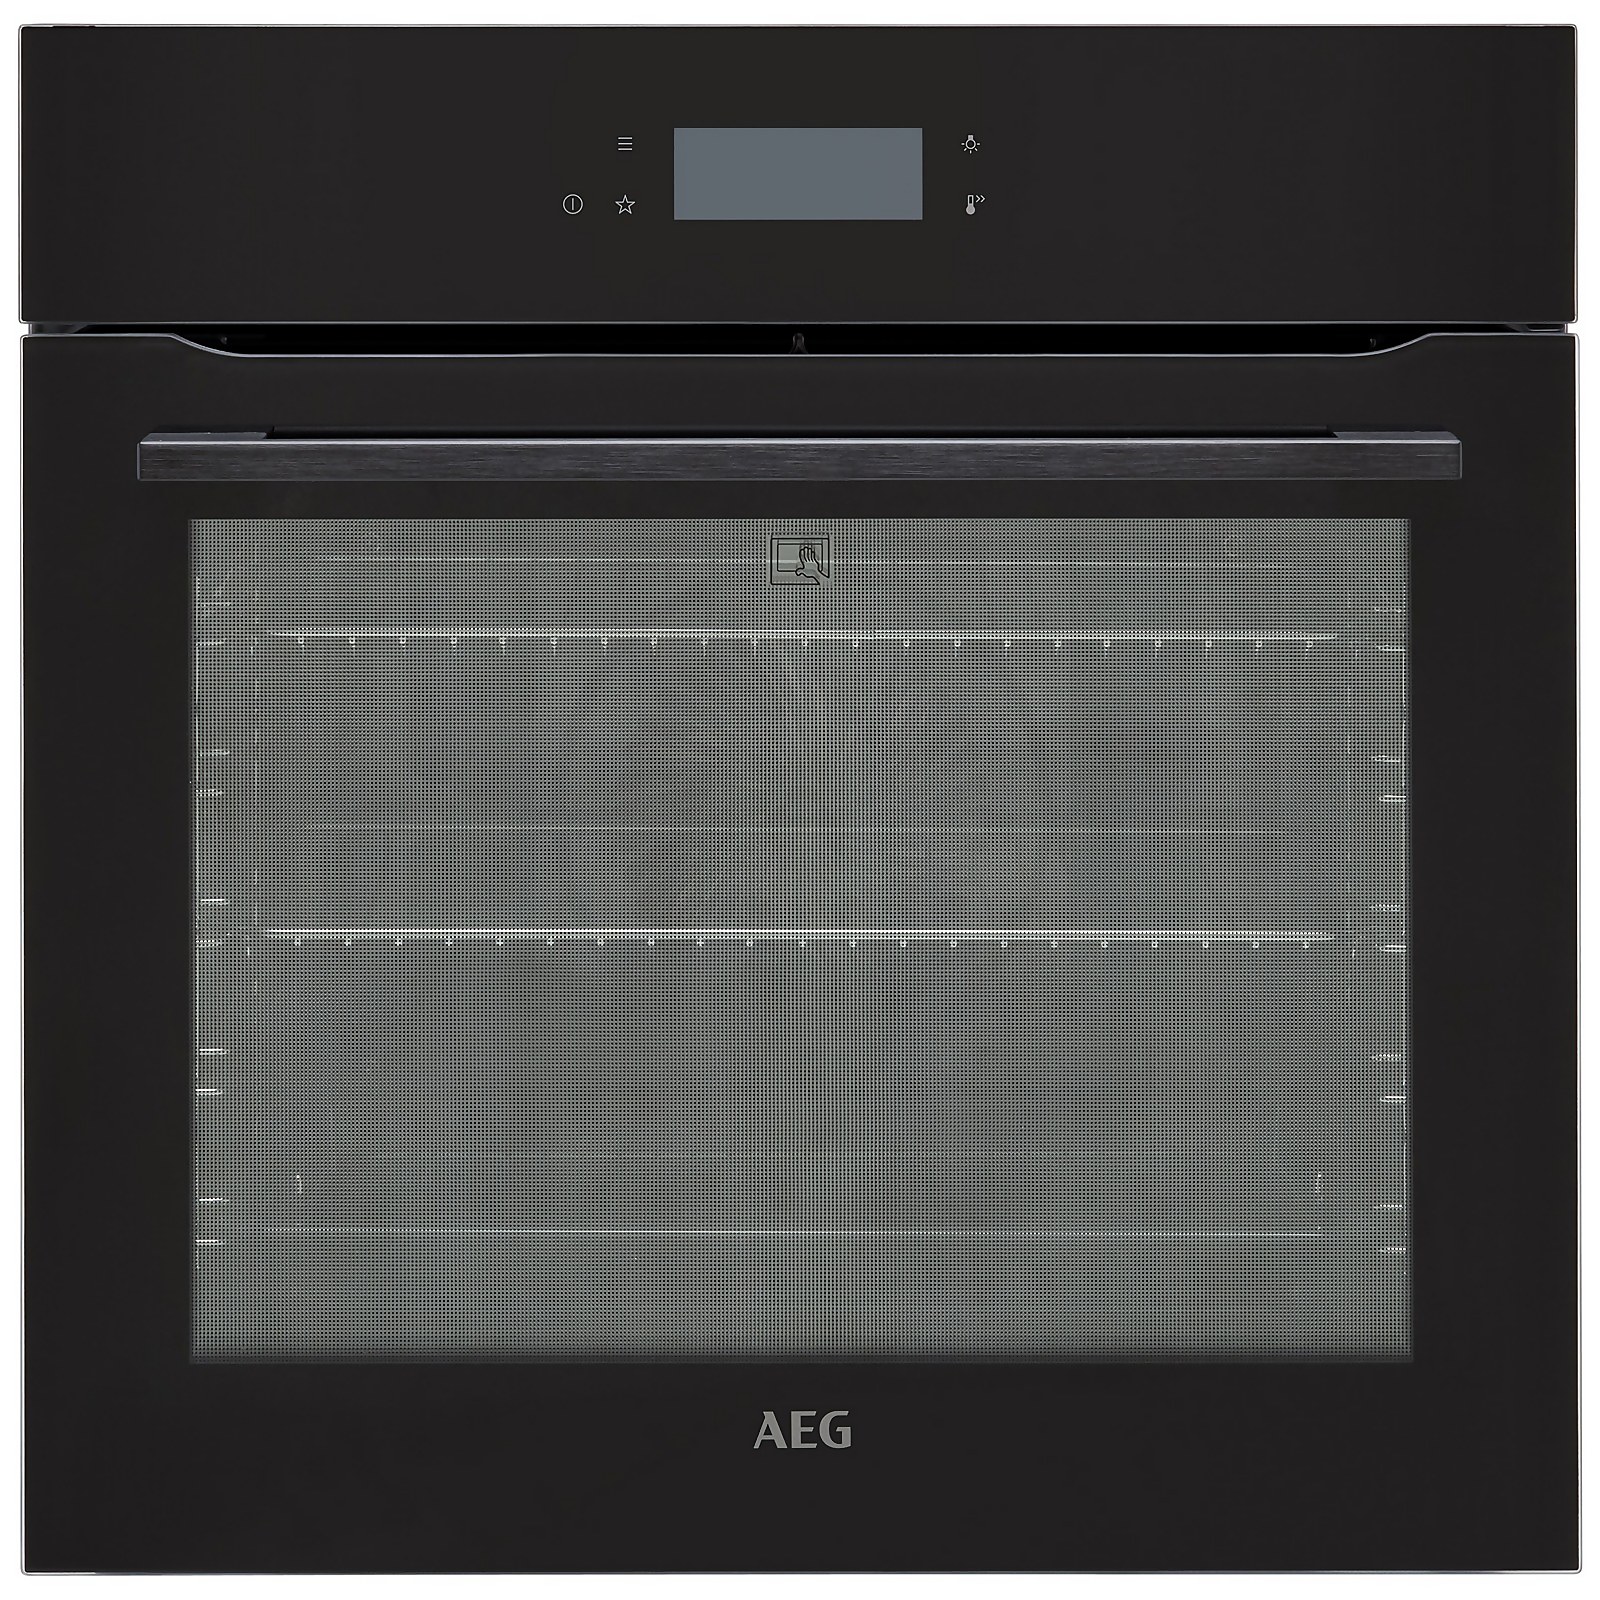 Photo of Aeg Assistedcooking Bpk748380b Wifi Connected Built In Electric Single Oven - Black